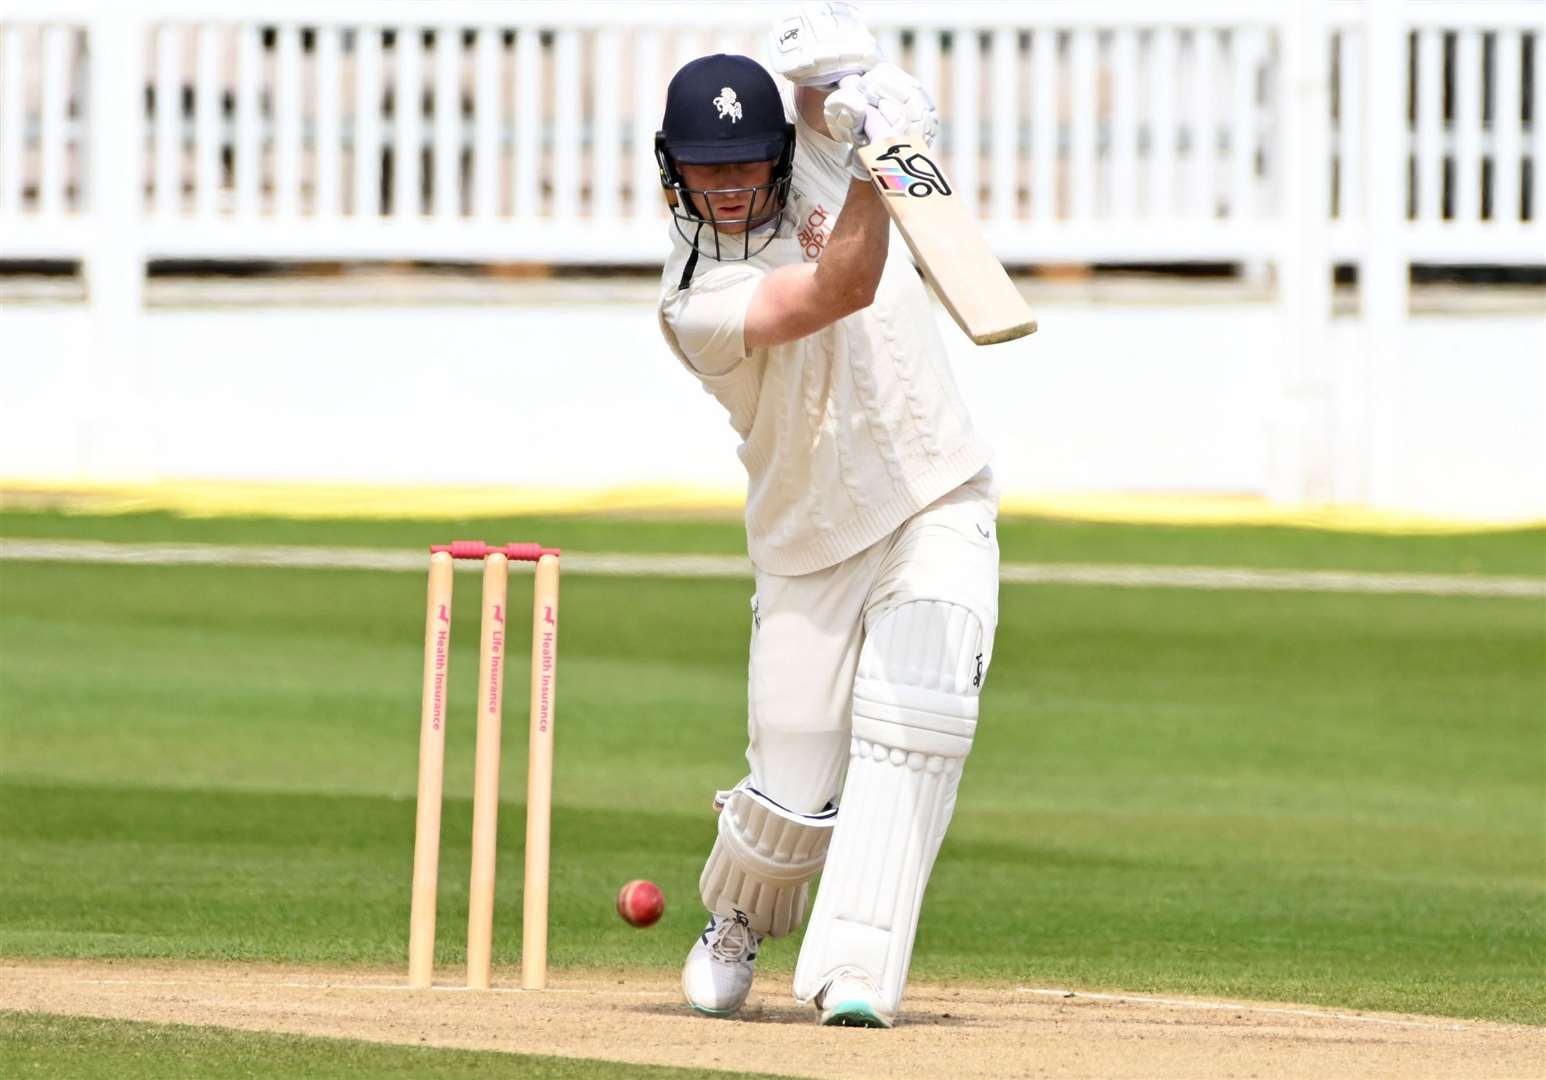 Kent’s Joey Evison on his way to a defiant half-century against Surrey on Monday. Picture: Barry Goodwin